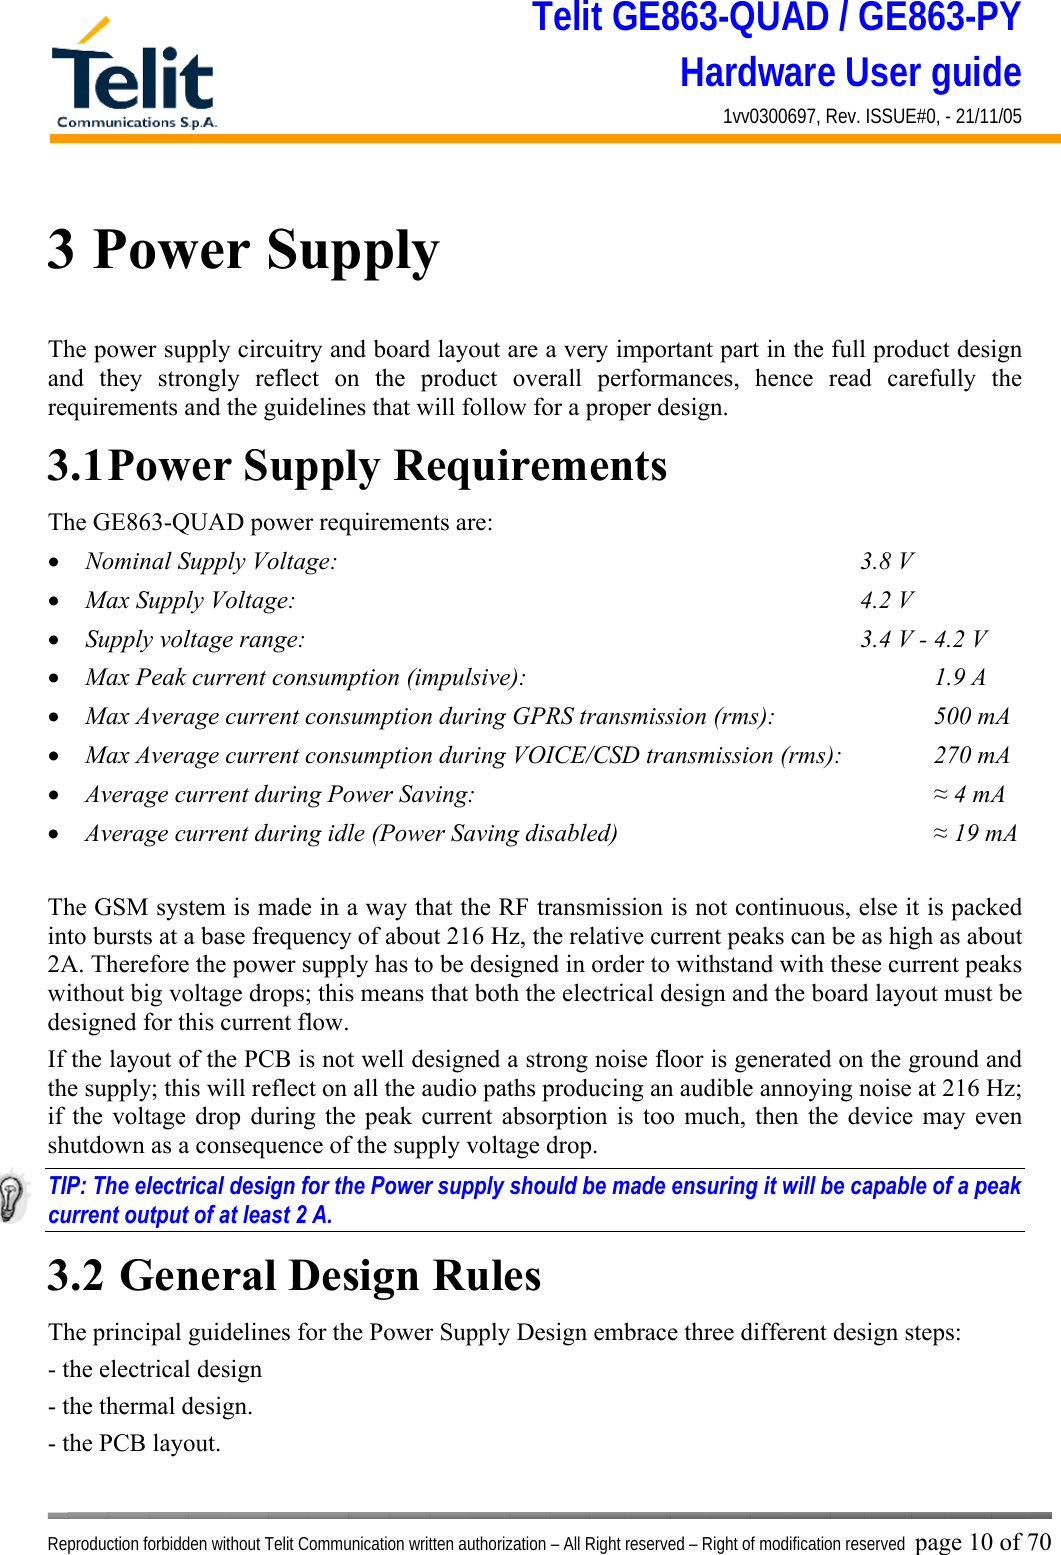 Telit GE863-QUAD / GE863-PY Hardware User guide 1vv0300697, Rev. ISSUE#0, - 21/11/05    Reproduction forbidden without Telit Communication written authorization – All Right reserved – Right of modification reserved page 10 of 70 3 Power Supply The power supply circuitry and board layout are a very important part in the full product design and they strongly reflect on the product overall performances, hence read carefully the requirements and the guidelines that will follow for a proper design. 3.1 Power Supply Requirements The GE863-QUAD power requirements are: •  Nominal Supply Voltage:        3.8 V •  Max Supply Voltage:        4.2 V •  Supply voltage range:                      3.4 V - 4.2 V •  Max Peak current consumption (impulsive):             1.9 A •  Max Average current consumption during GPRS transmission (rms):      500 mA •  Max Average current consumption during VOICE/CSD transmission (rms):    270 mA •  Average current during Power Saving:               ≈ 4 mA •  Average current during idle (Power Saving disabled)          ≈ 19 mA  The GSM system is made in a way that the RF transmission is not continuous, else it is packed into bursts at a base frequency of about 216 Hz, the relative current peaks can be as high as about 2A. Therefore the power supply has to be designed in order to withstand with these current peaks without big voltage drops; this means that both the electrical design and the board layout must be designed for this current flow. If the layout of the PCB is not well designed a strong noise floor is generated on the ground and the supply; this will reflect on all the audio paths producing an audible annoying noise at 216 Hz; if the voltage drop during the peak current absorption is too much, then the device may even shutdown as a consequence of the supply voltage drop. TIP: The electrical design for the Power supply should be made ensuring it will be capable of a peak current output of at least 2 A. 3.2  General Design Rules The principal guidelines for the Power Supply Design embrace three different design steps: - the electrical design - the thermal design. - the PCB layout. 